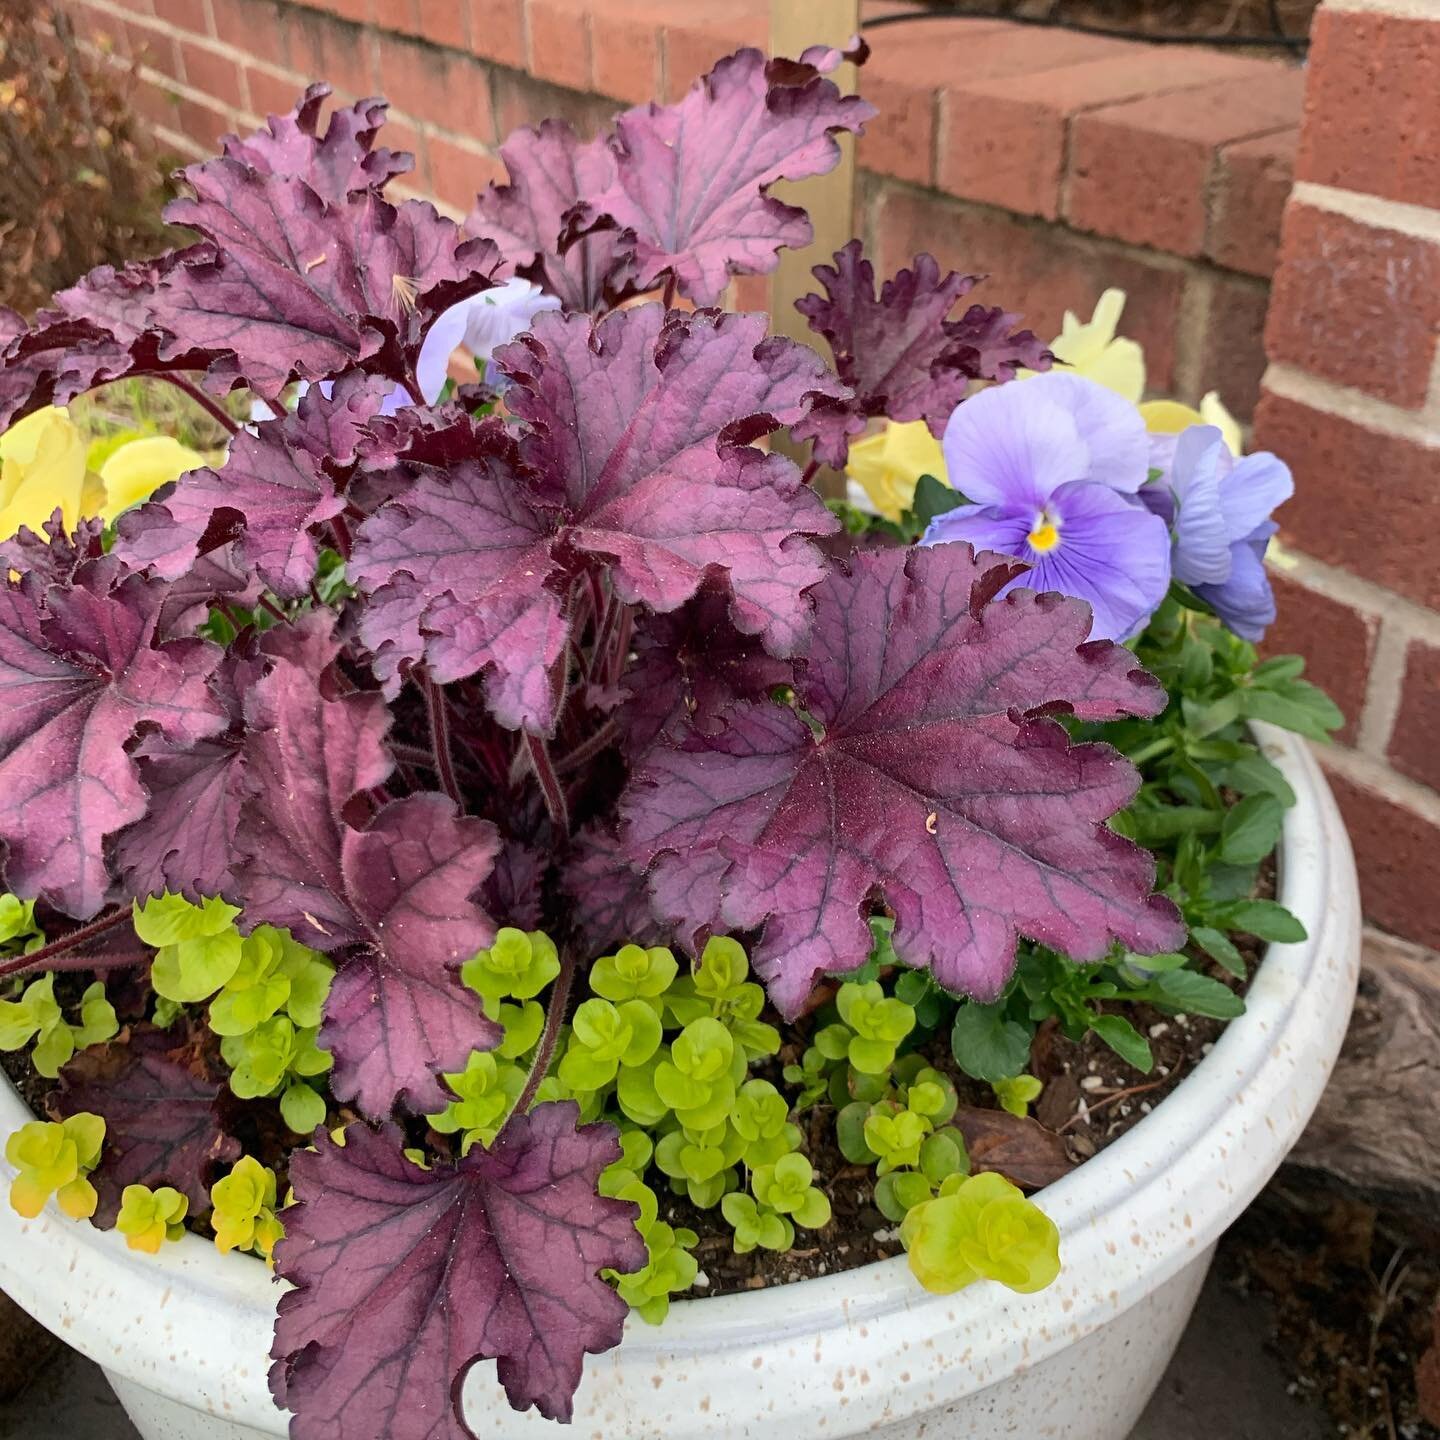 Nothing says spring like new growth from perennials 👩🏻&zwj;🌾 

This spring container has creeping jenny, pansies, and a Grape Timeless Heuchera! This heuchera will be moved to a shadier spot once the heat of summer is here!
&bull;
&bull;
&bull;
&b